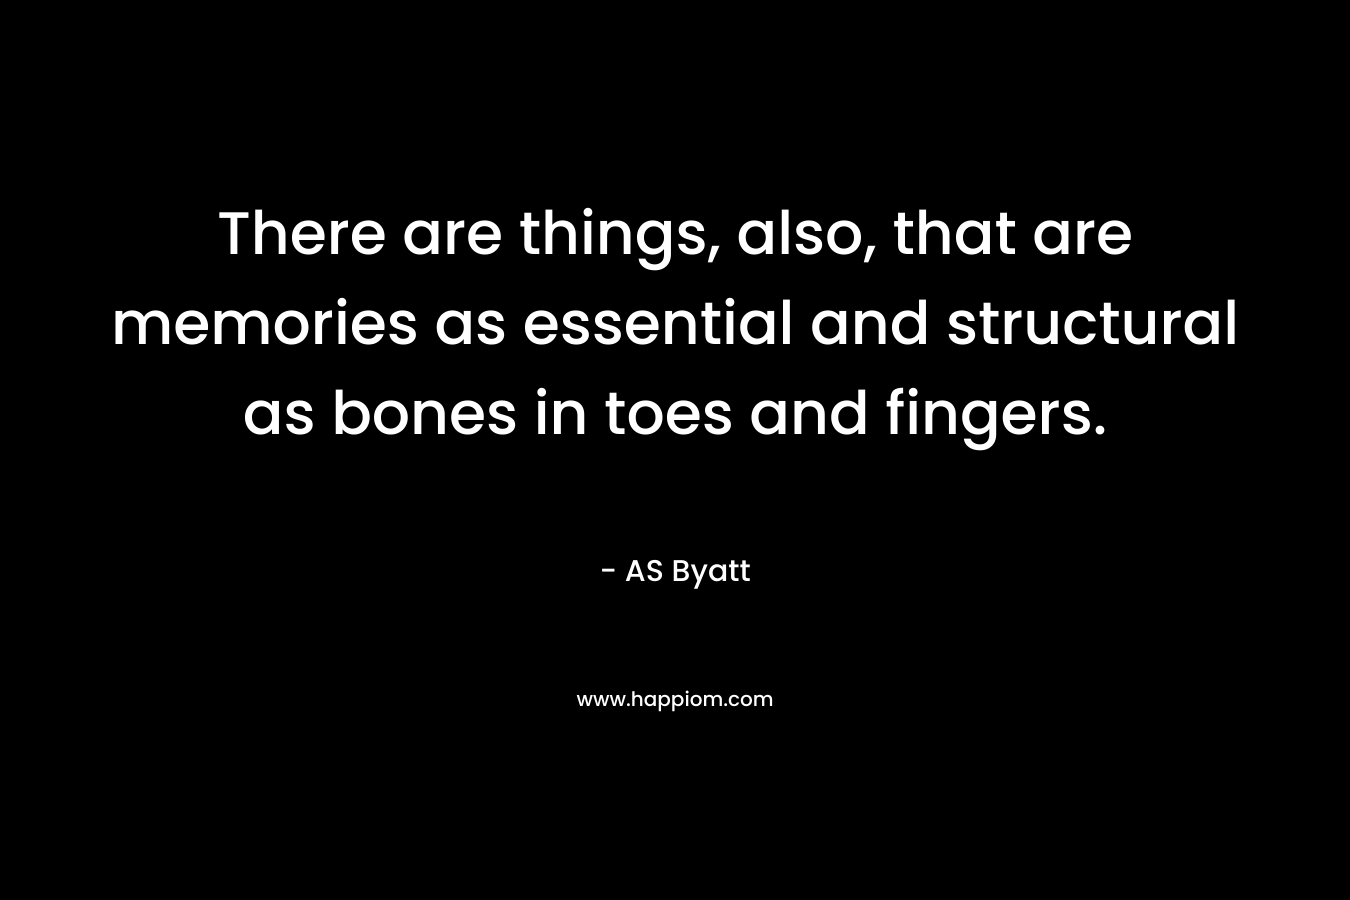 There are things, also, that are memories as essential and structural as bones in toes and fingers.